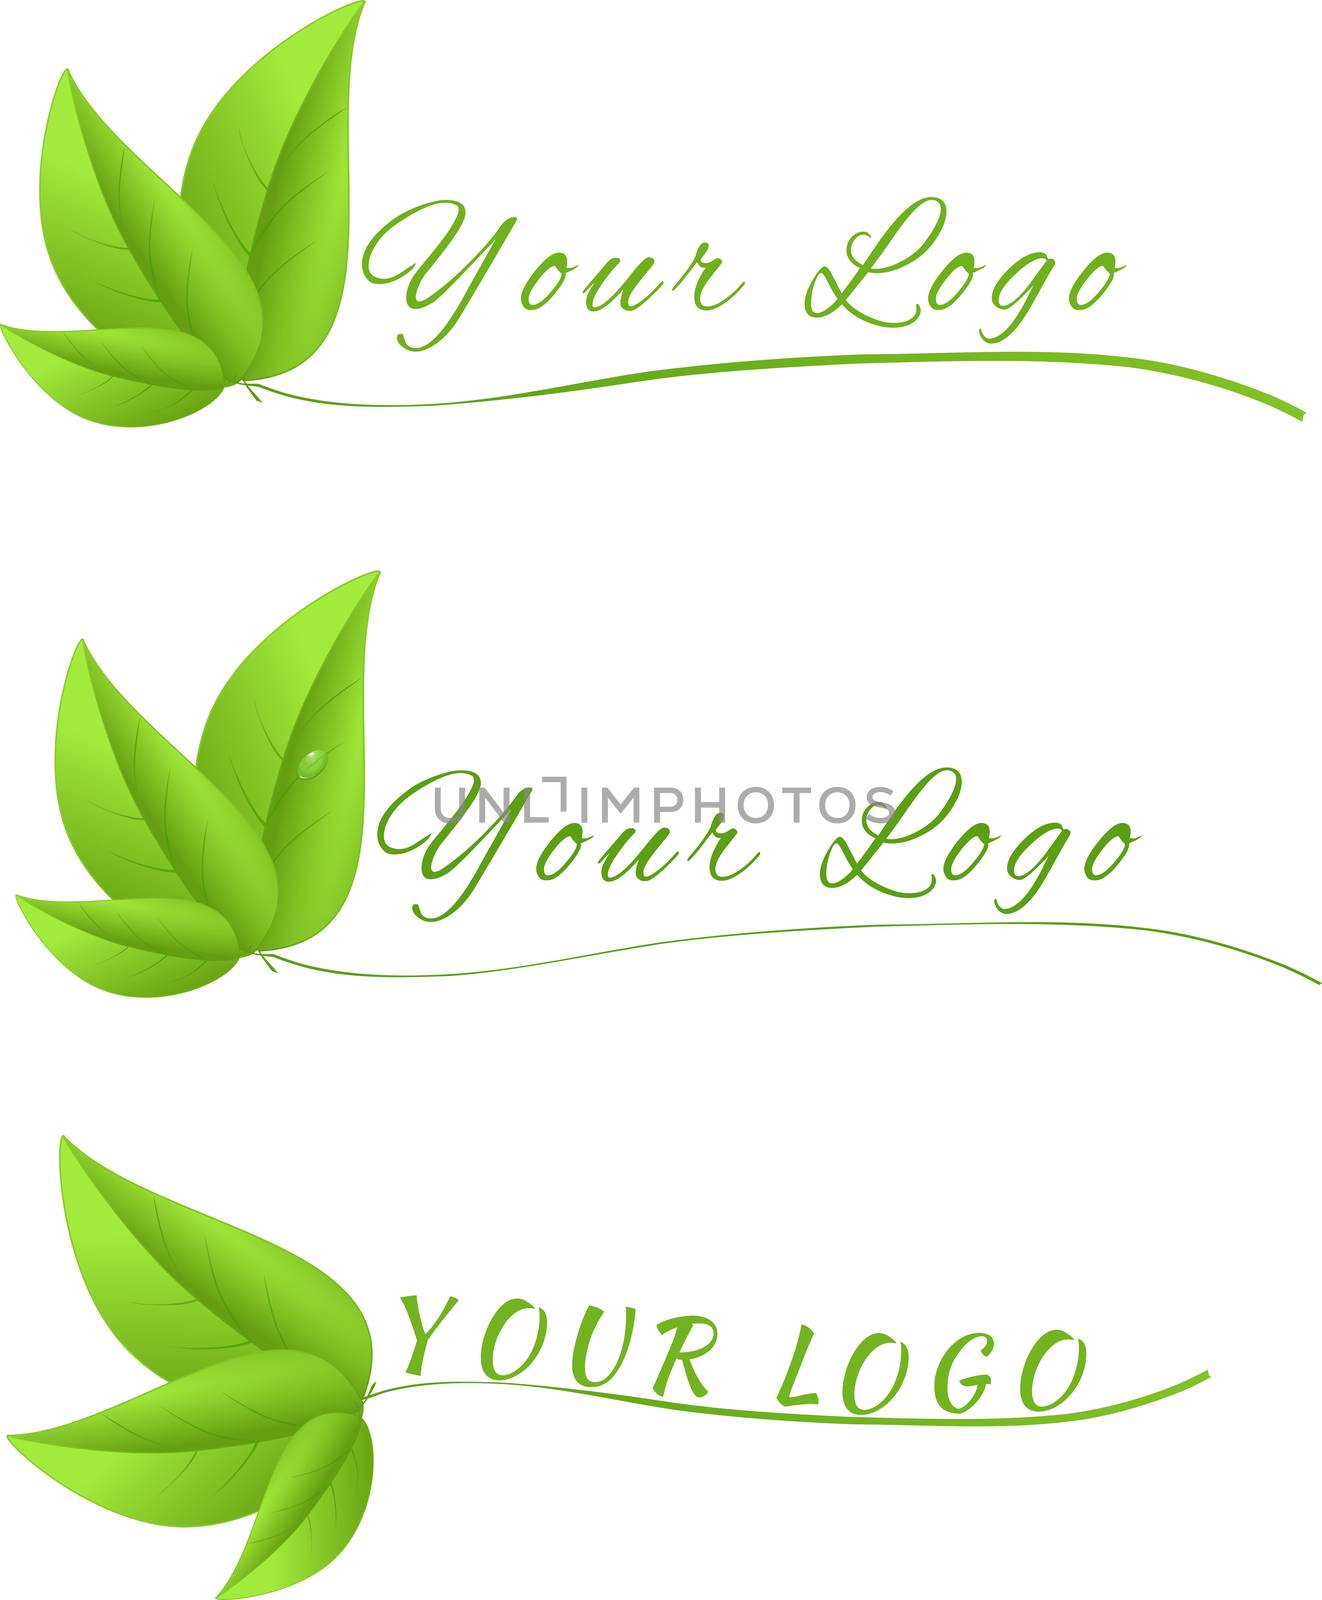 Brand logos made from leaves by sylwia